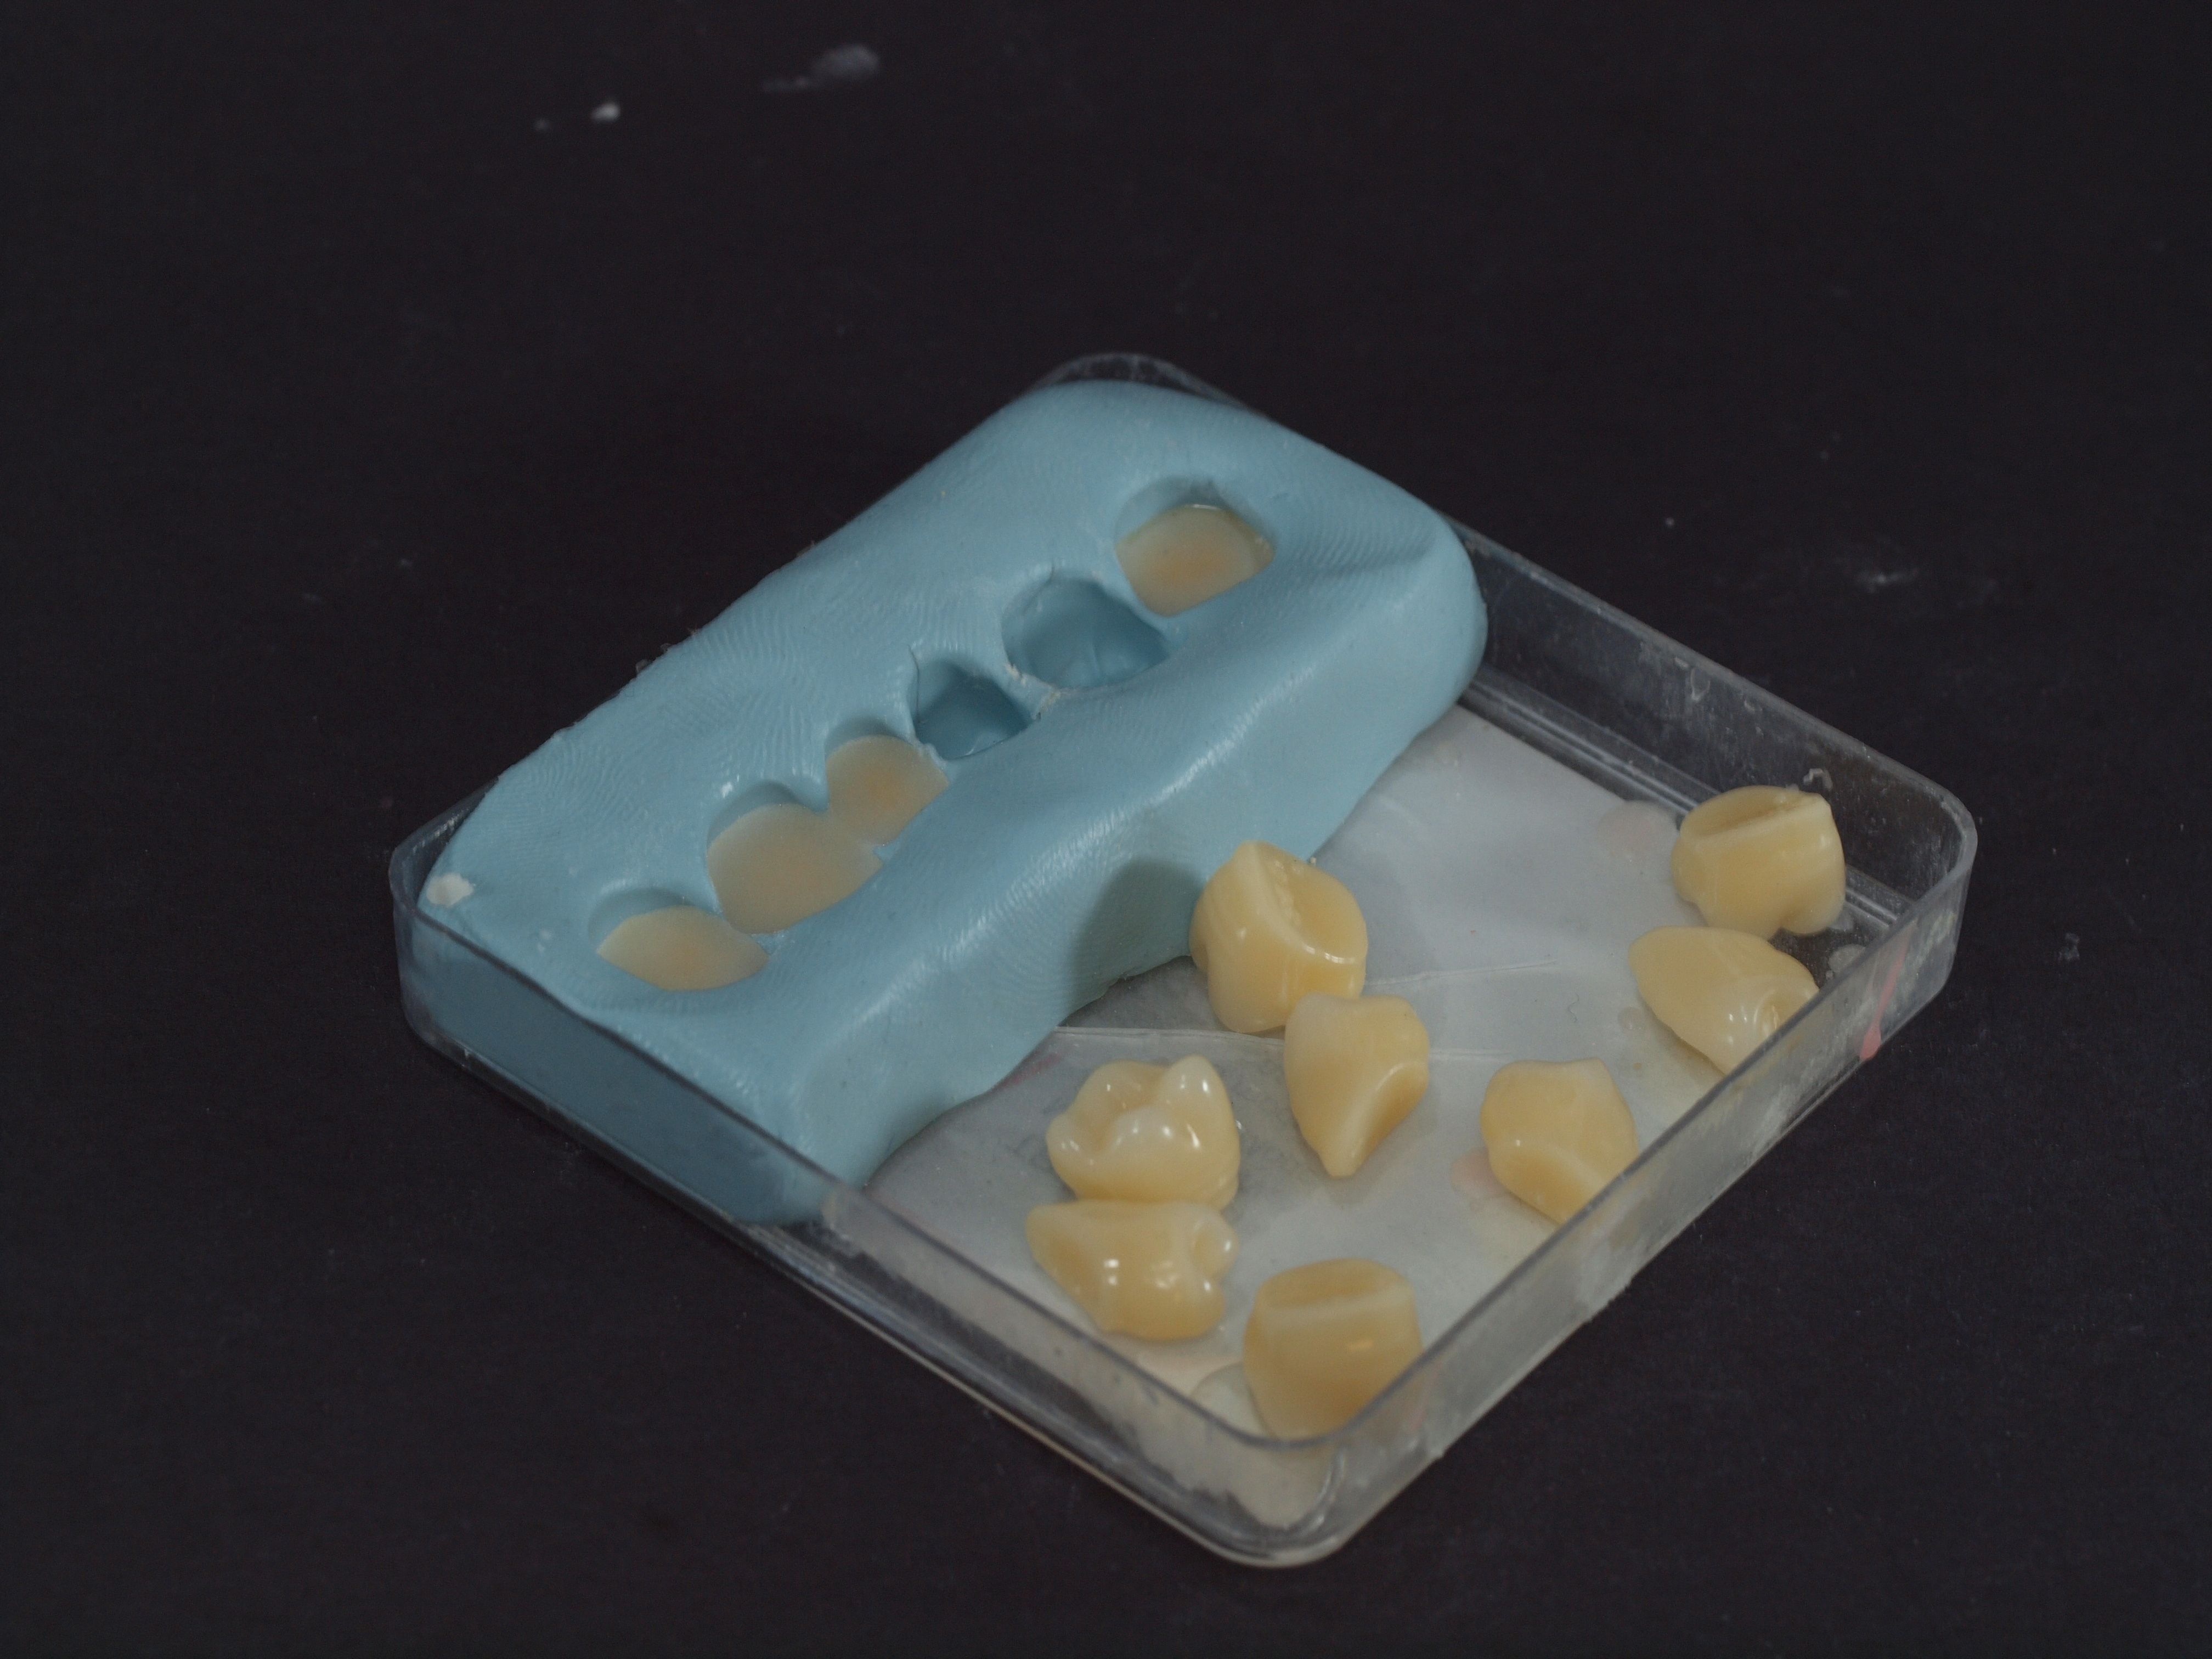 Lab putty duplication of denture teeth provide a low-cost way to provide a provisional appliance that guides the patient toward a warrantable and comprehensive treatment. 